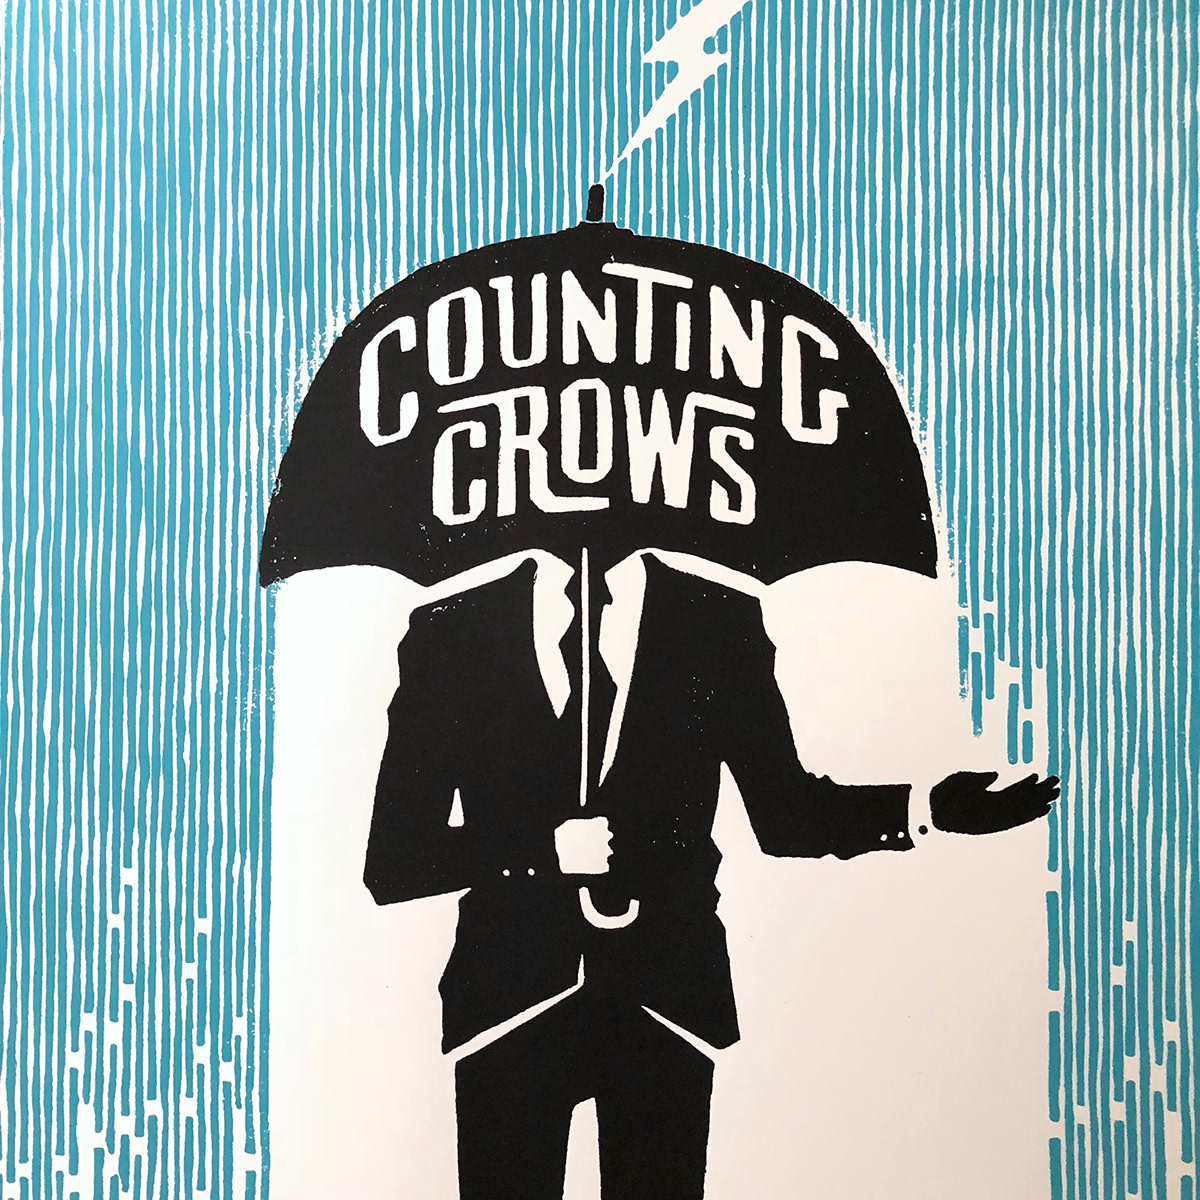 Rain king gig poster ROck Poster concert rock n roll Counting crows linoleum typography   hand made rockswell